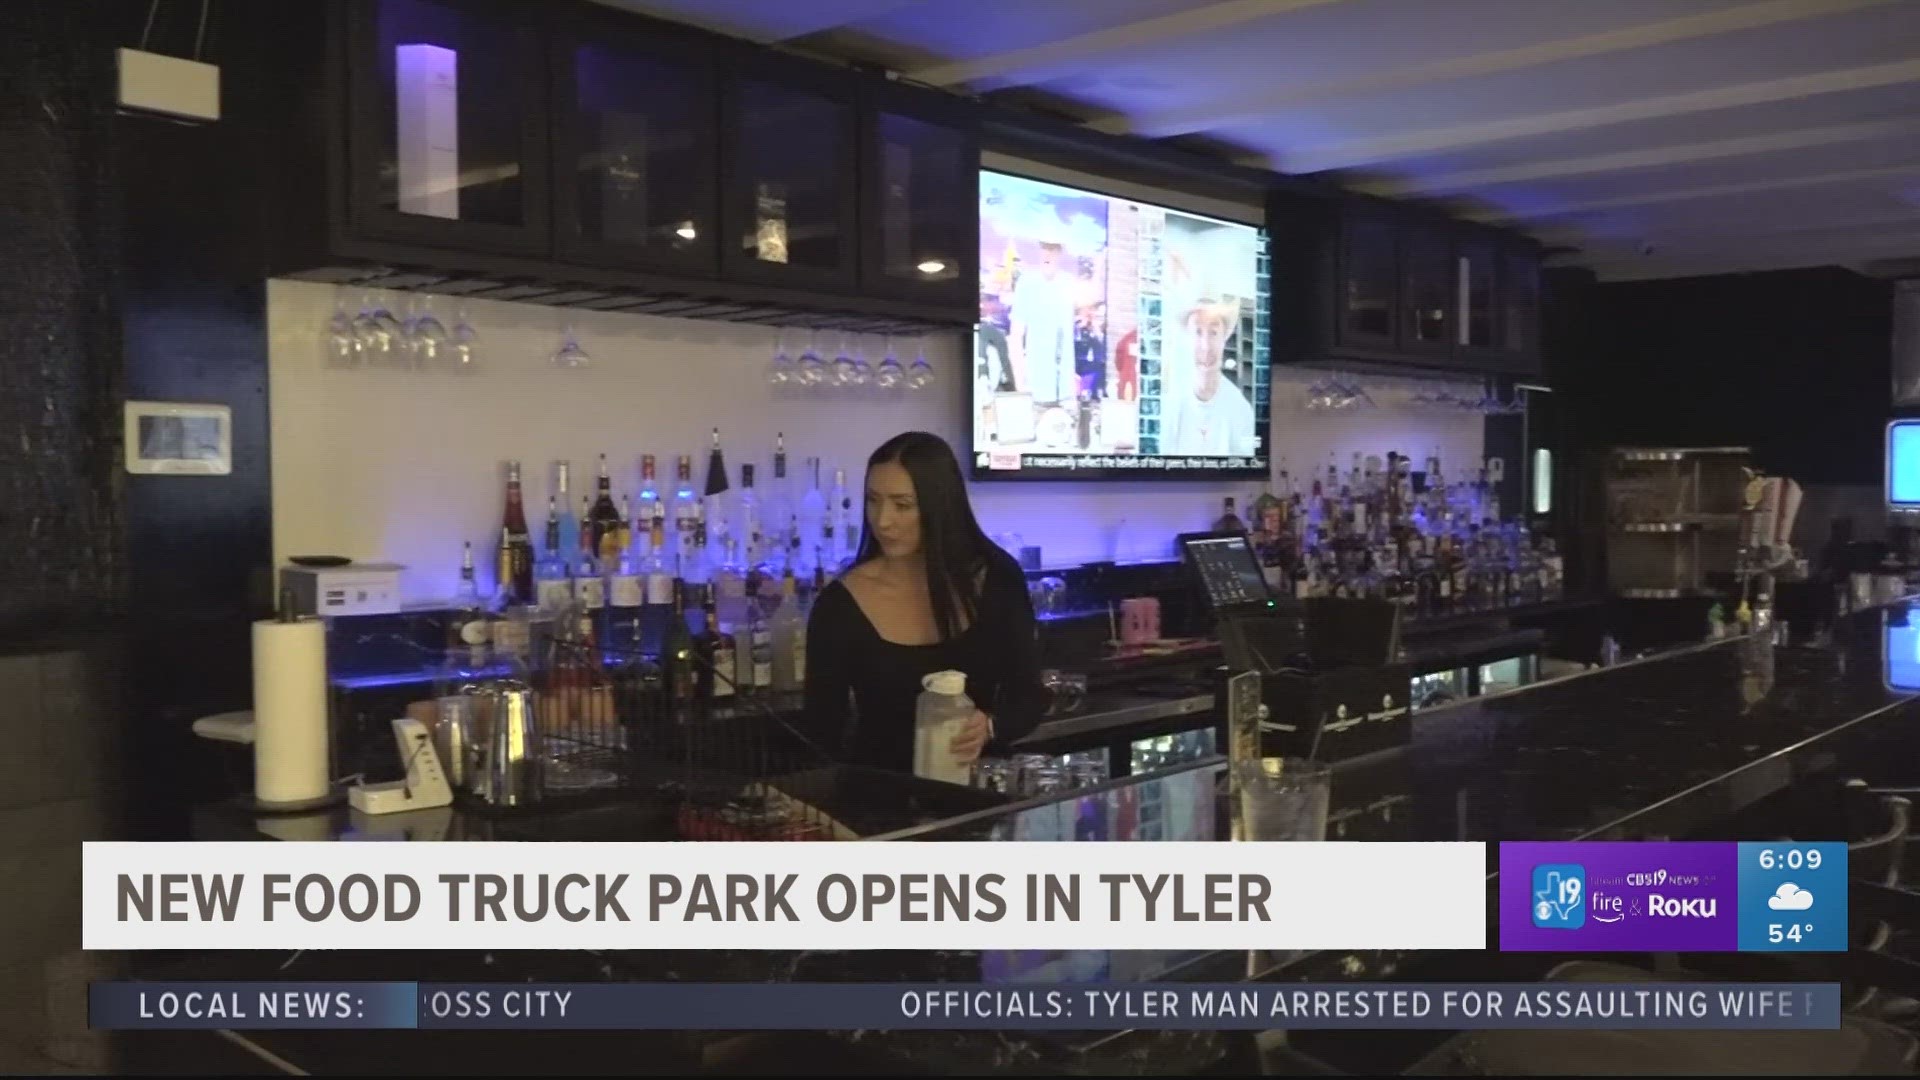 Welcome to The Xchange, the very first food truck park and indoor bar & lounge in Tyler.